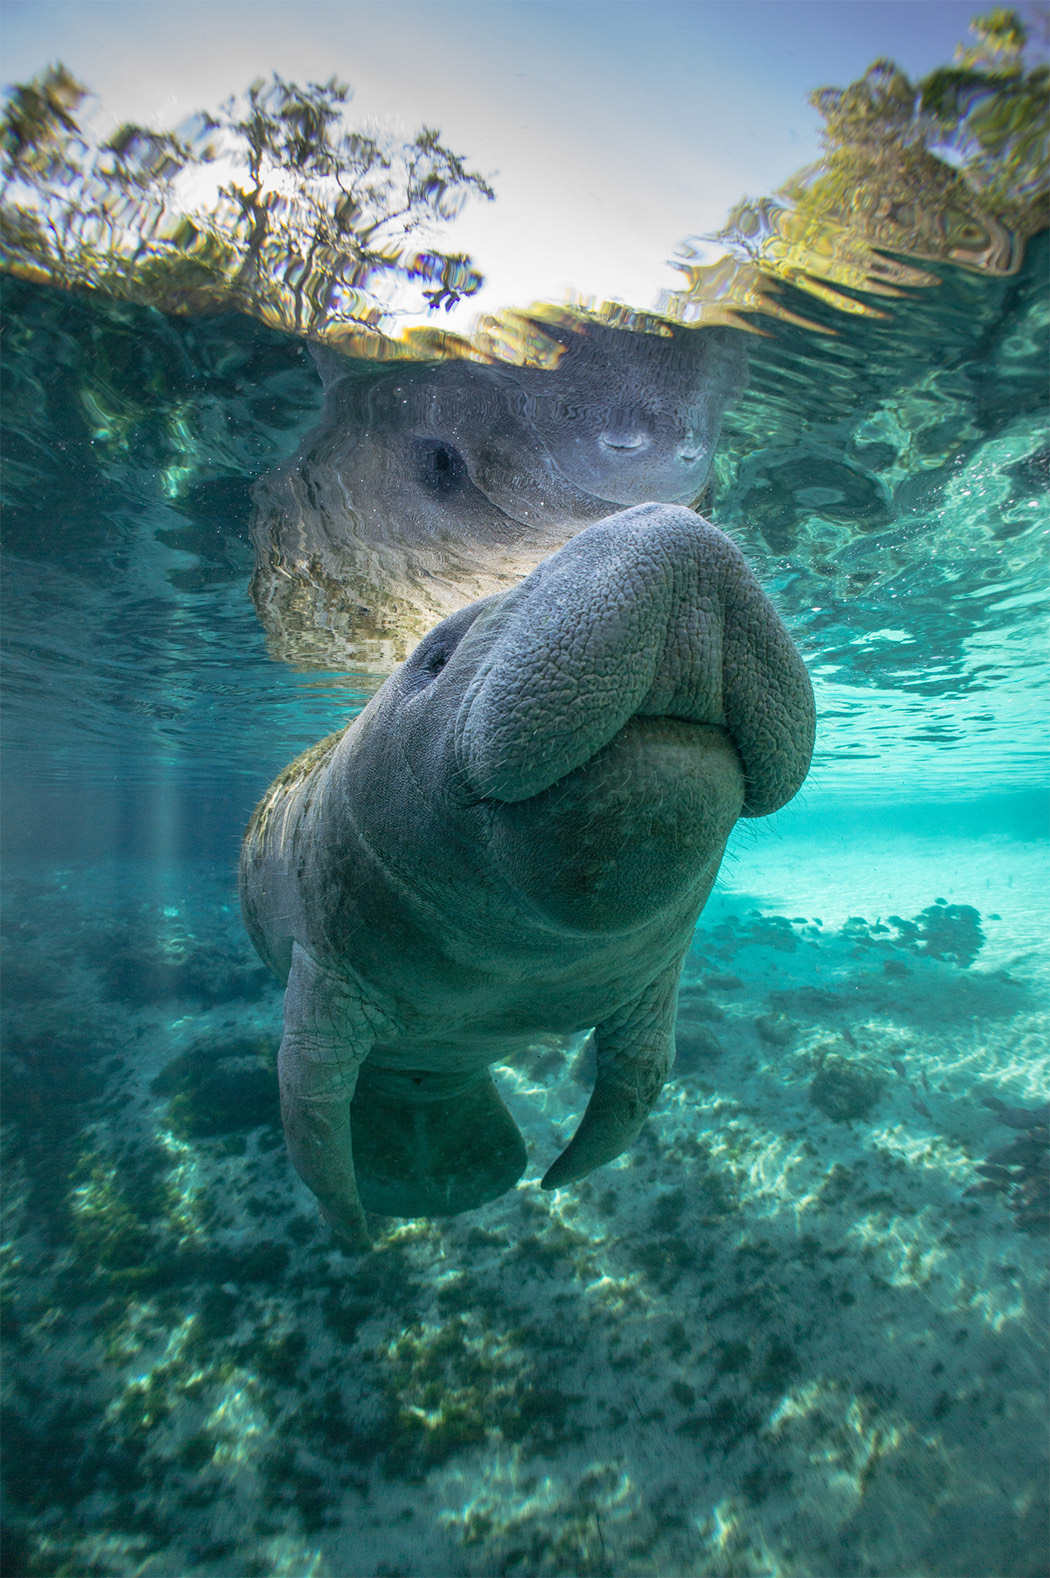 smiled manatee swimming in the river